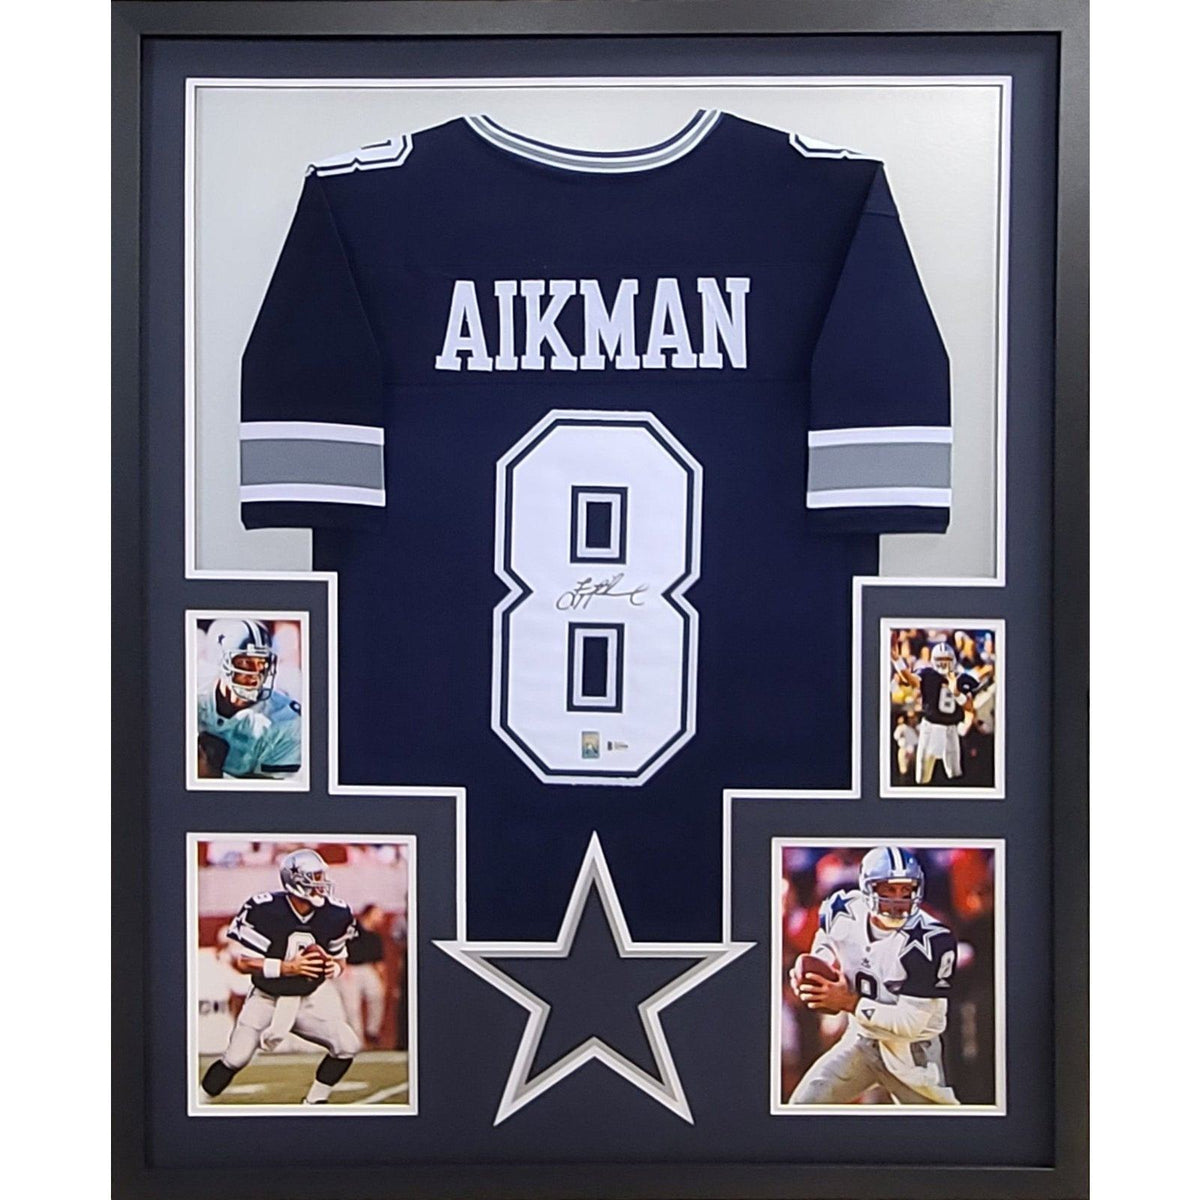 Troy Aikman Signed Jersey Beckett Autographed Dallas Cowboys UCLA